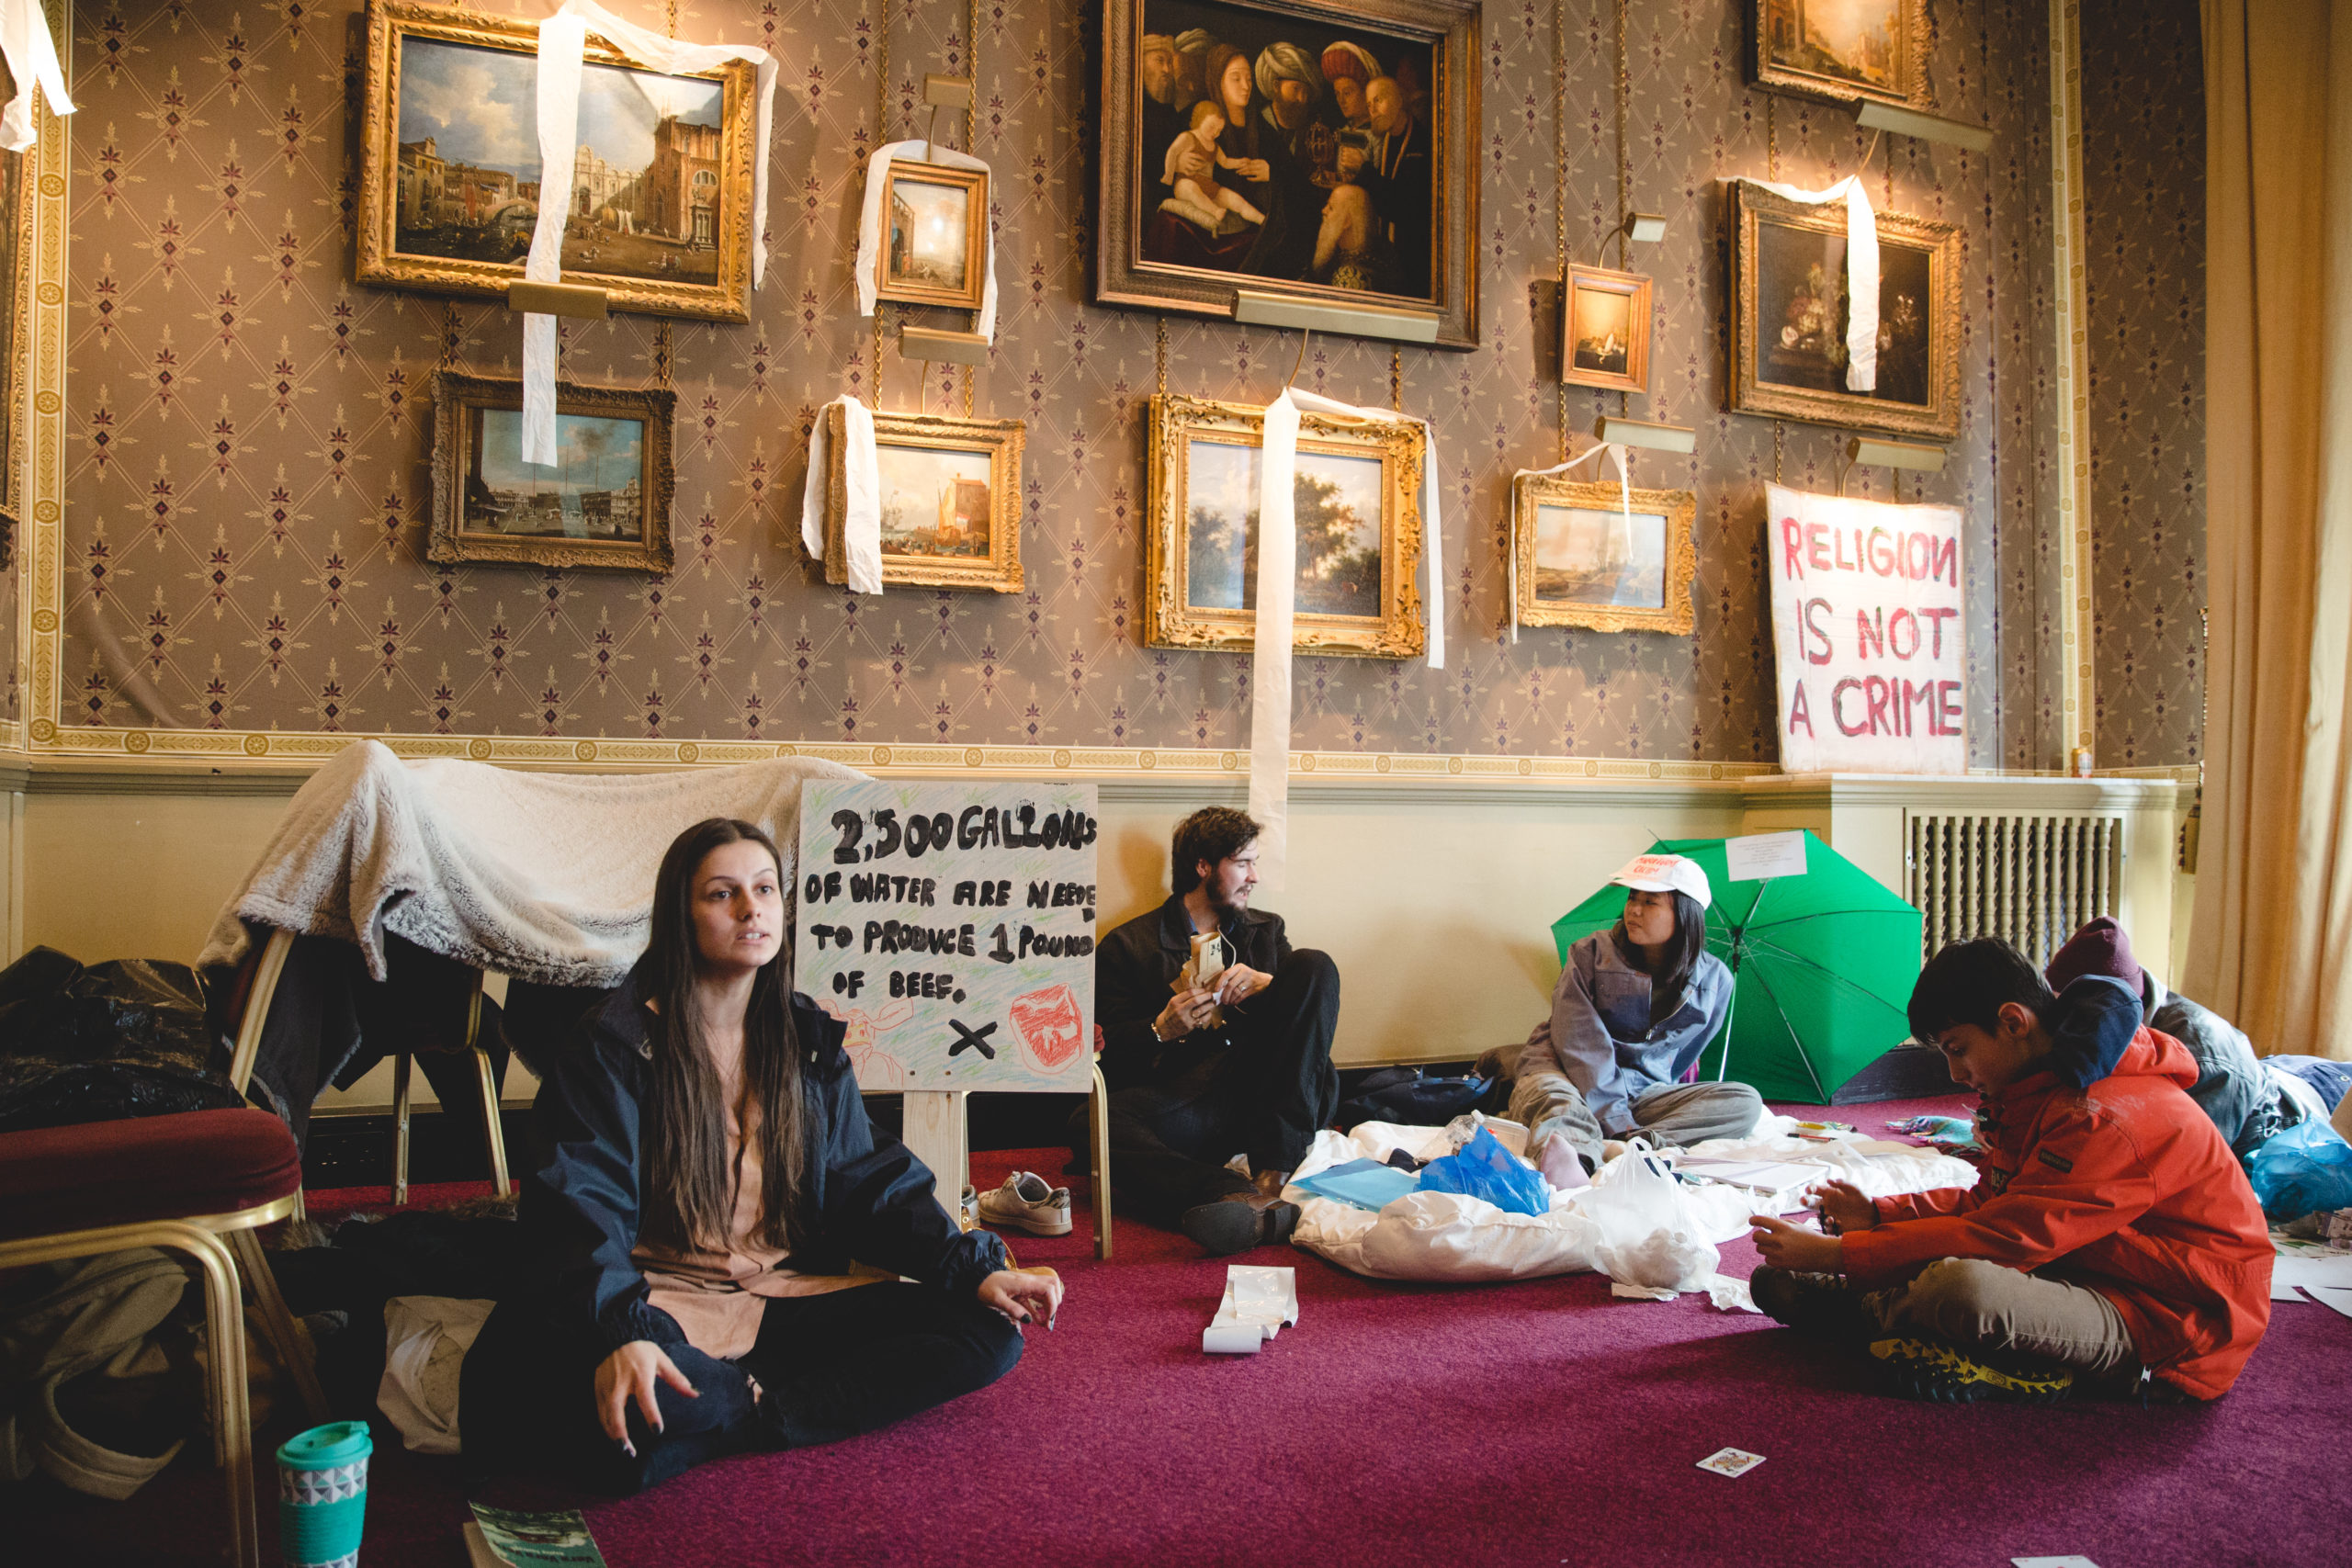 Students sitting in a museum gallery room of fine art paintings, with signs that bear messages such as "religion is not a crime"